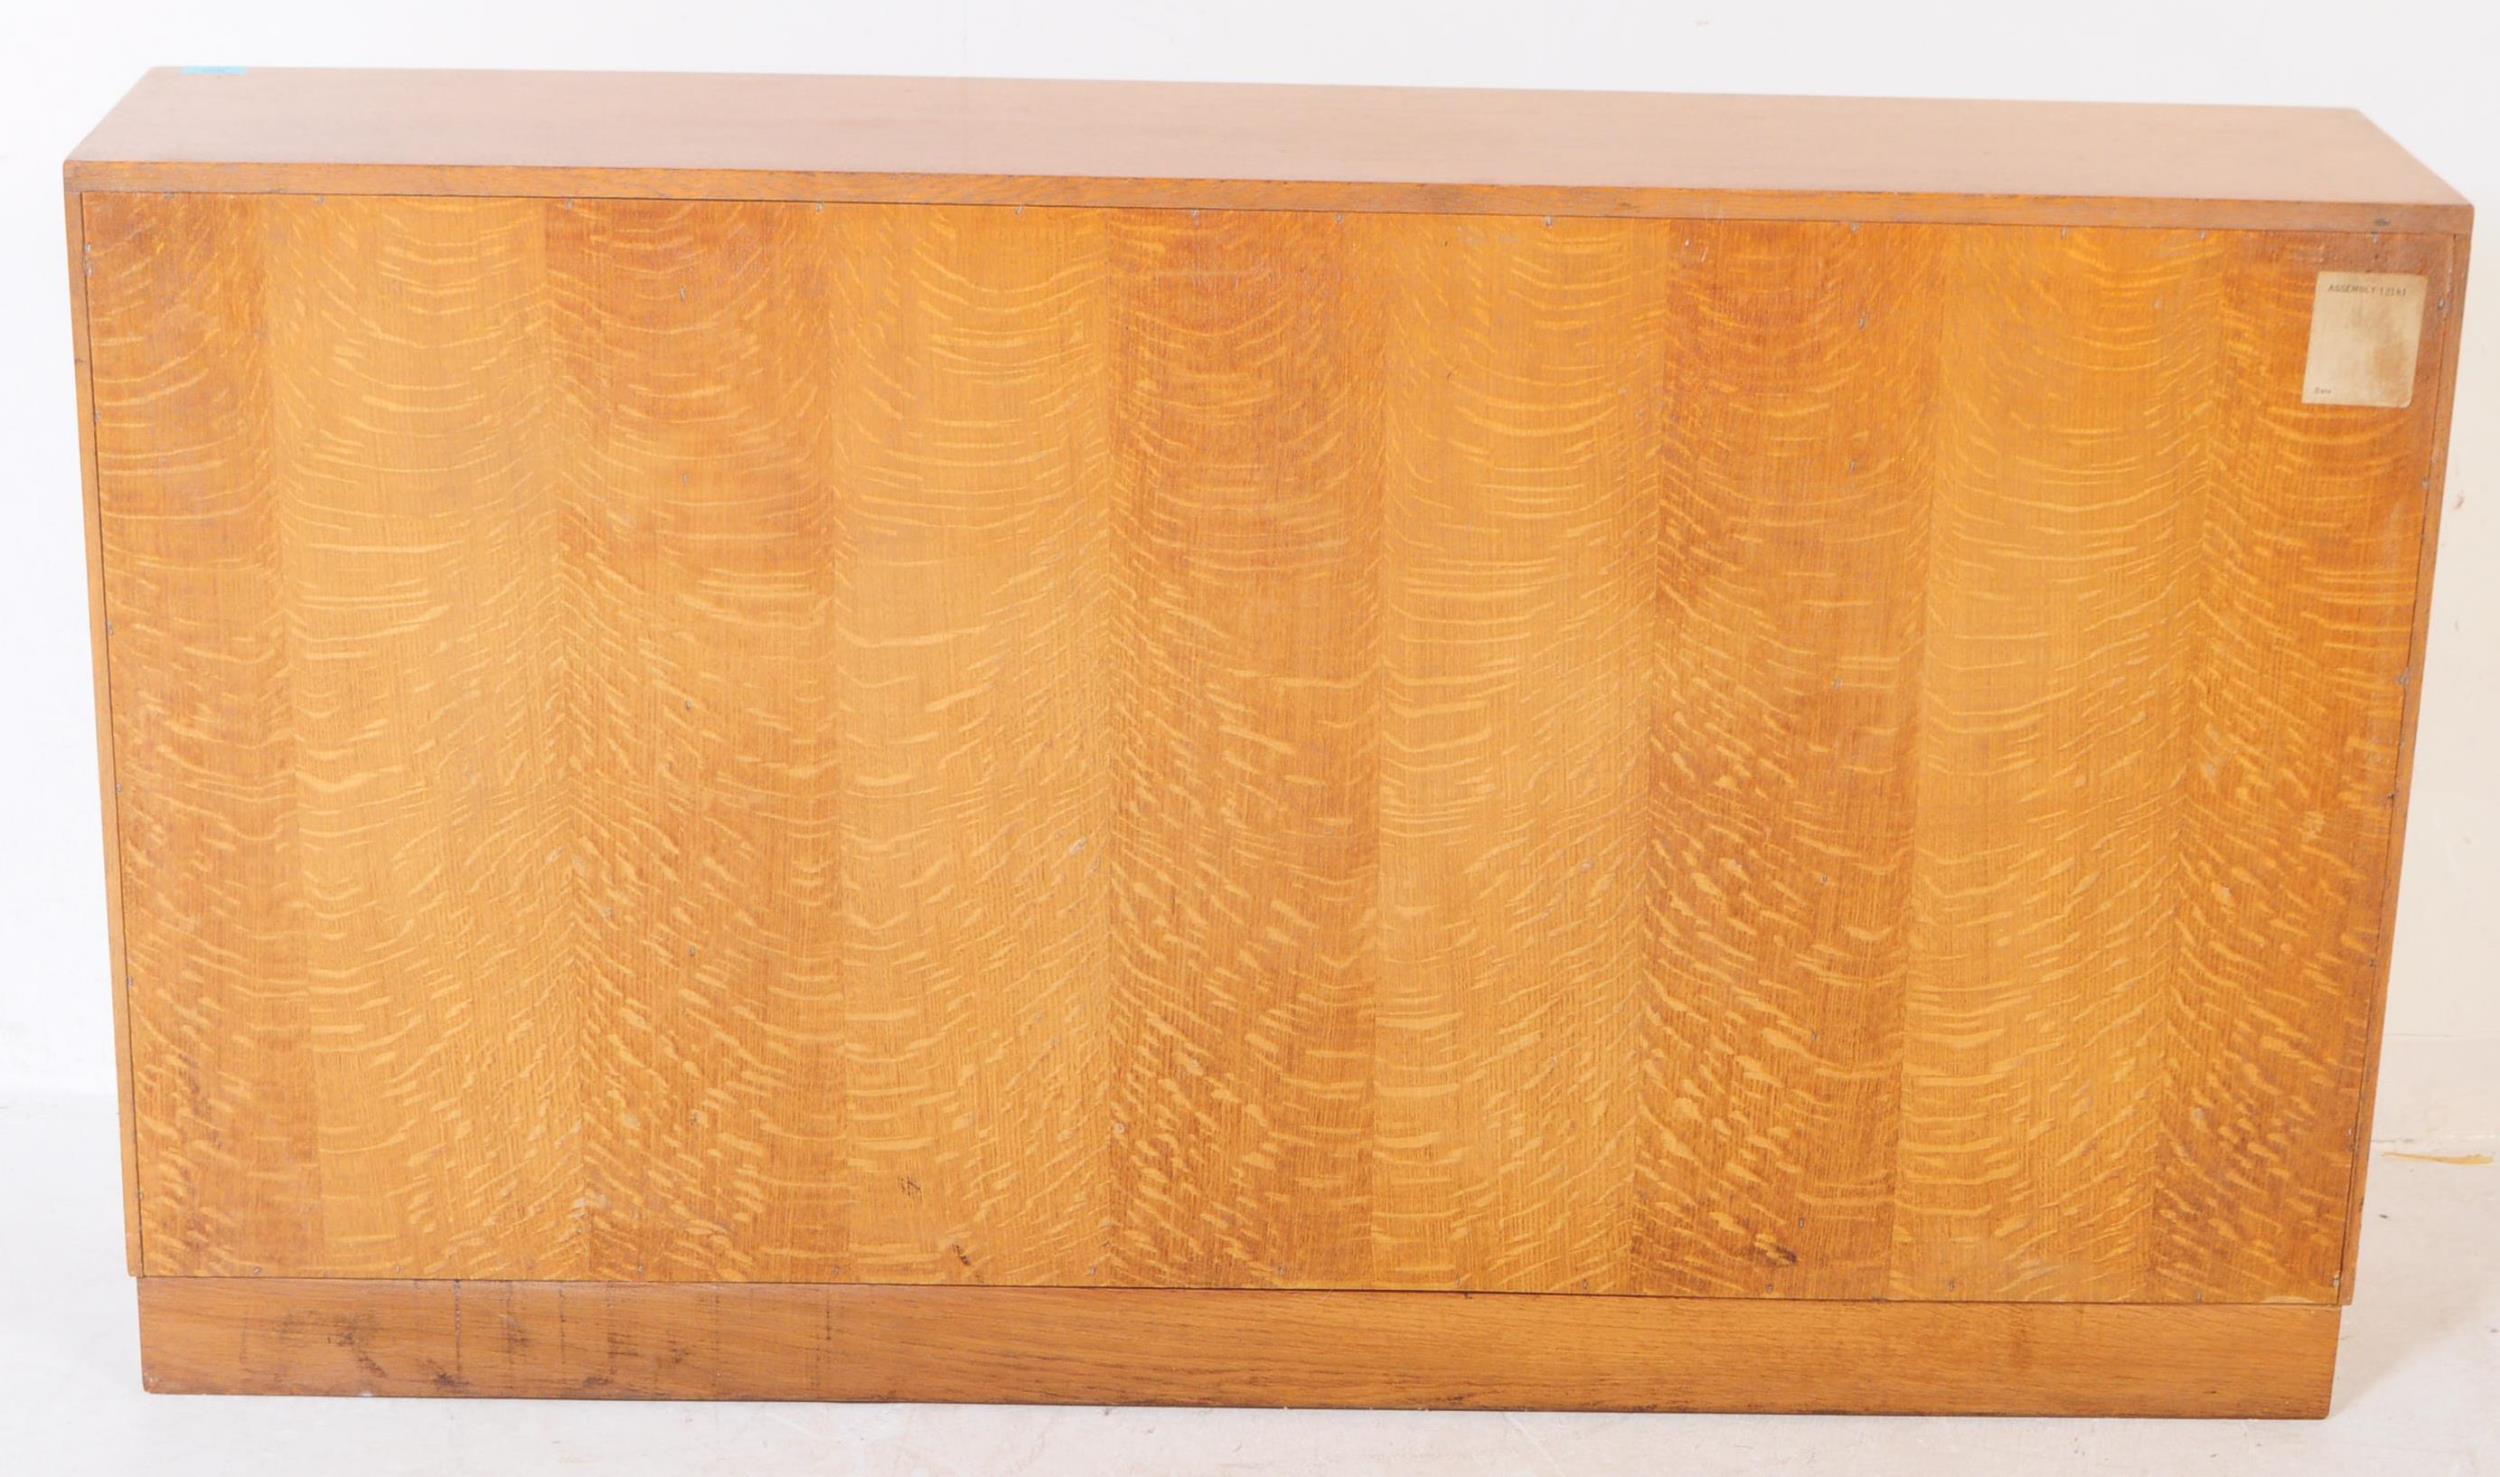 VINTAGE MID 20TH CENTURY OAK DISPLAY WALL UNIT / BOOKCASE - Image 6 of 6